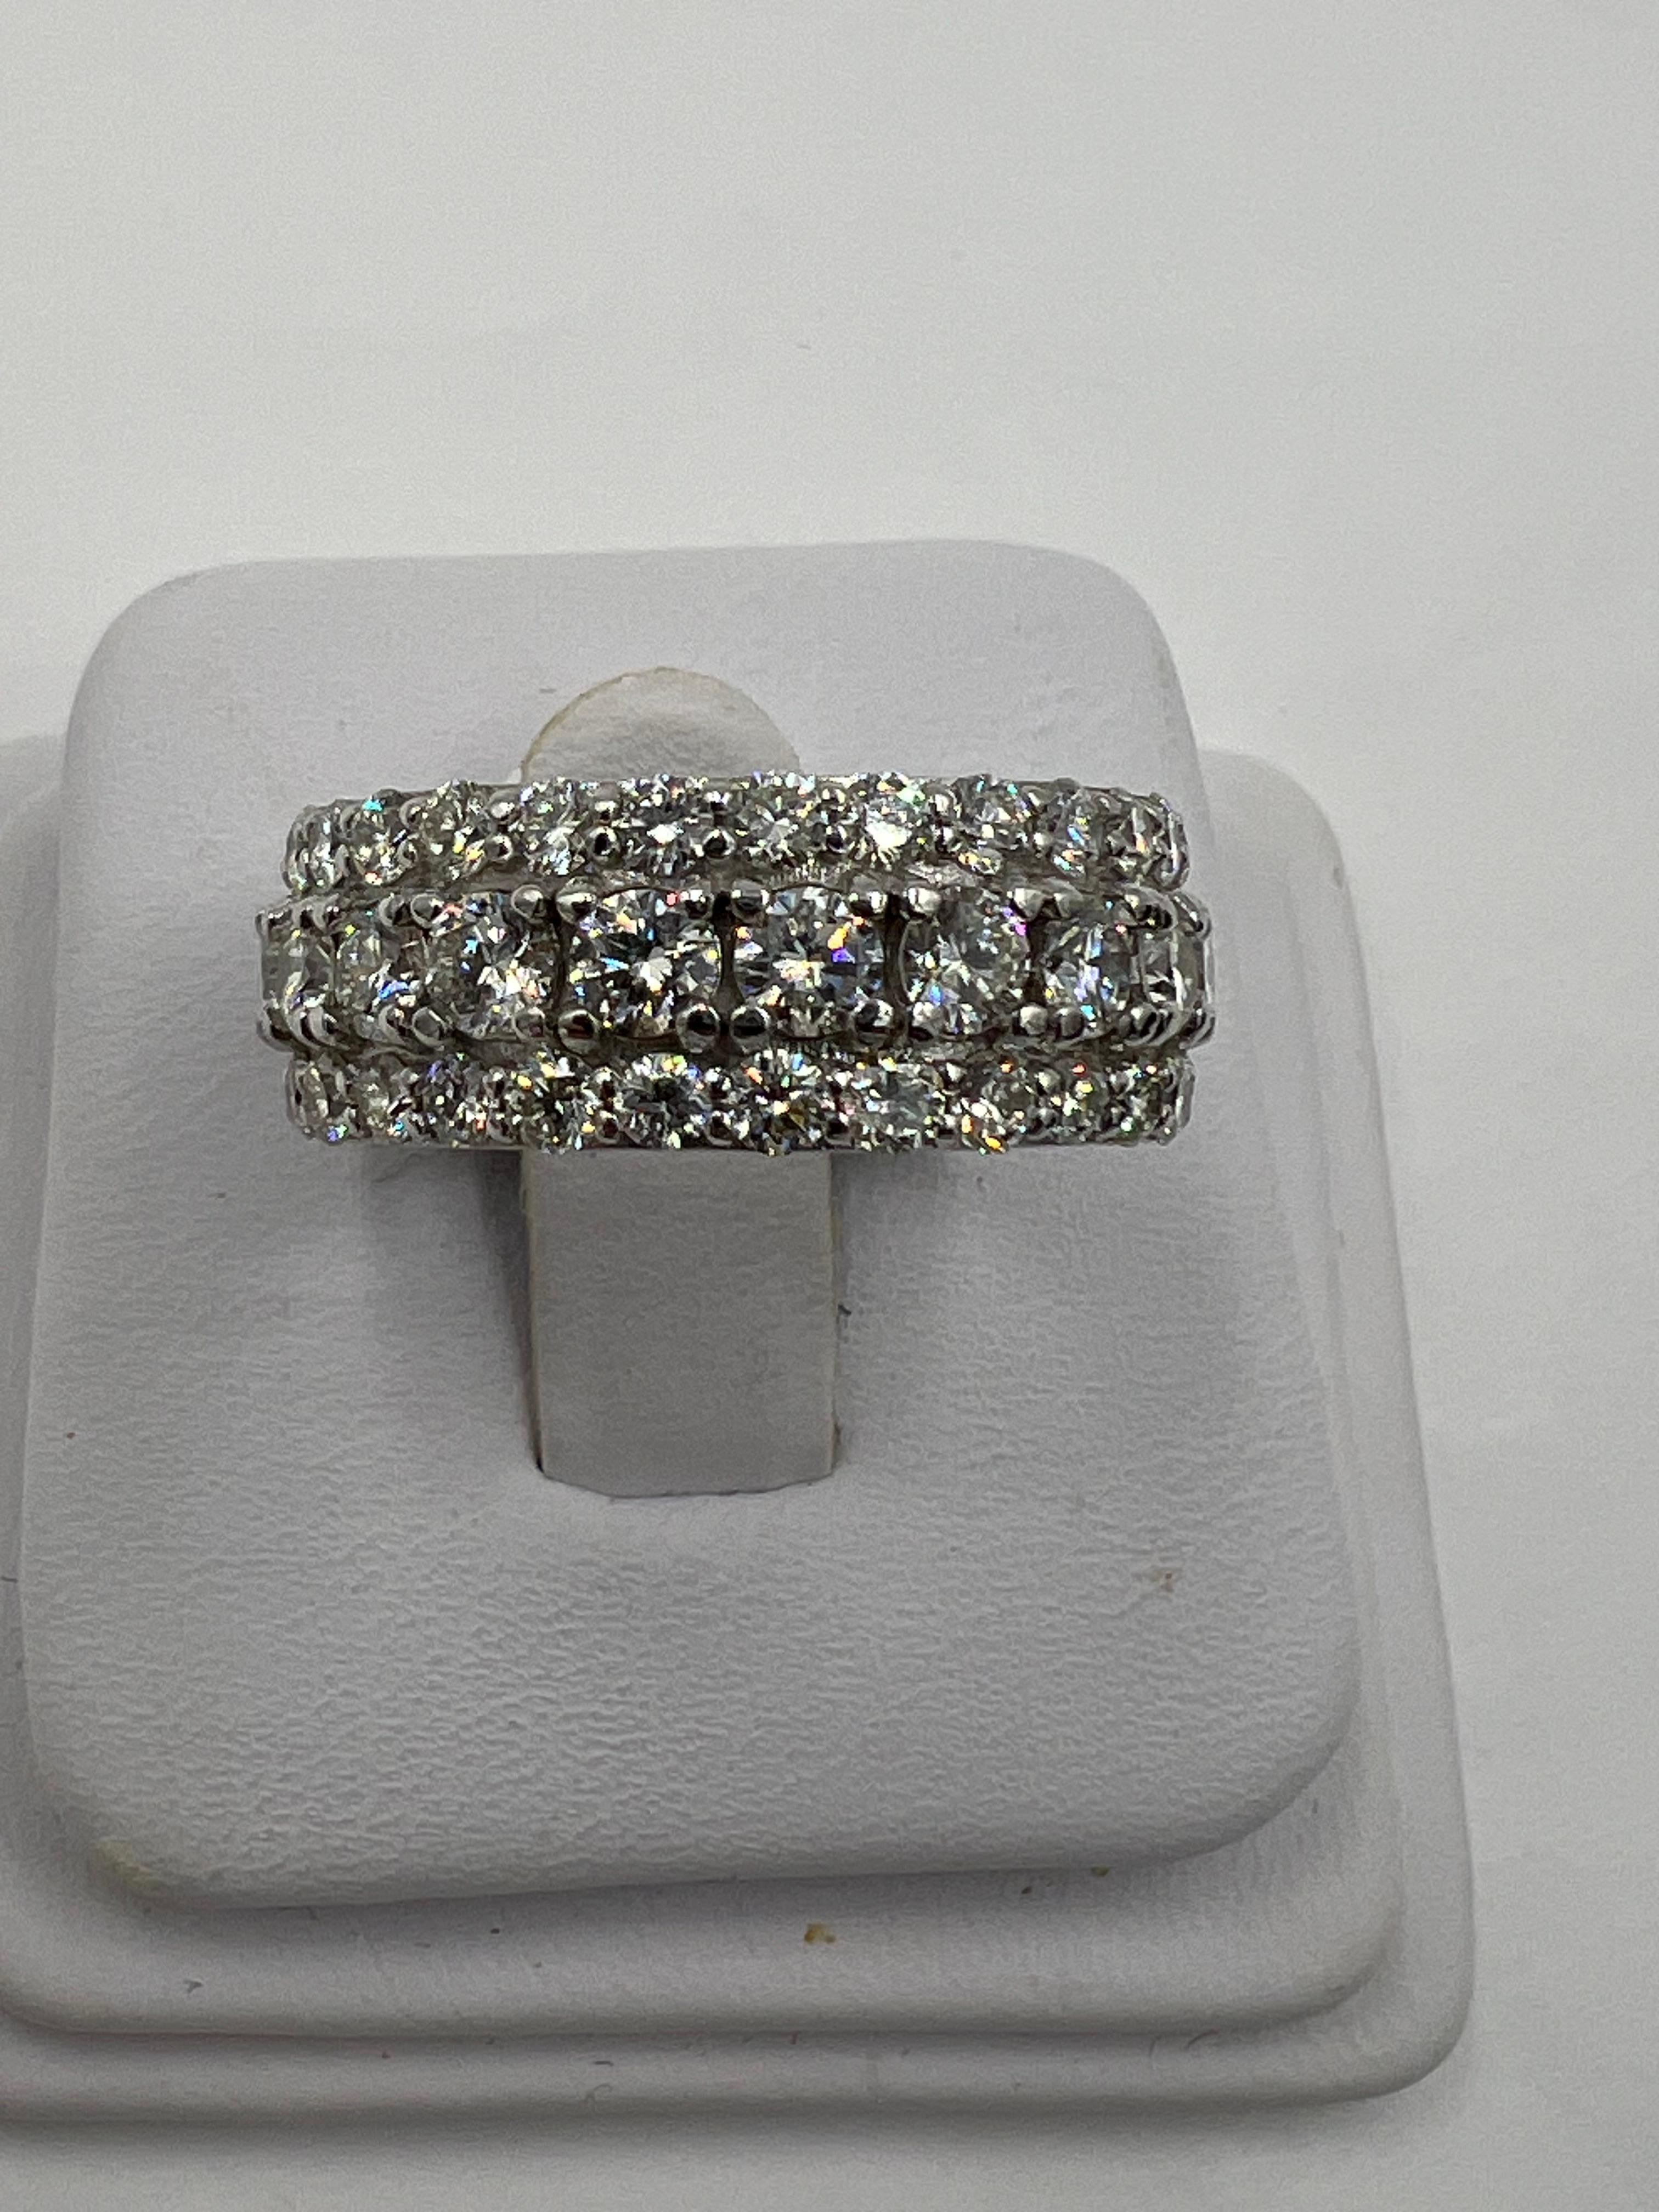 Three row diamond and white gold eternity band ring, size 9.25

This three row diamond white gold eternity ring is the epitome of elegance and sophistication. With its stunning design featuring three rows of sparkling diamonds set in luxurious white